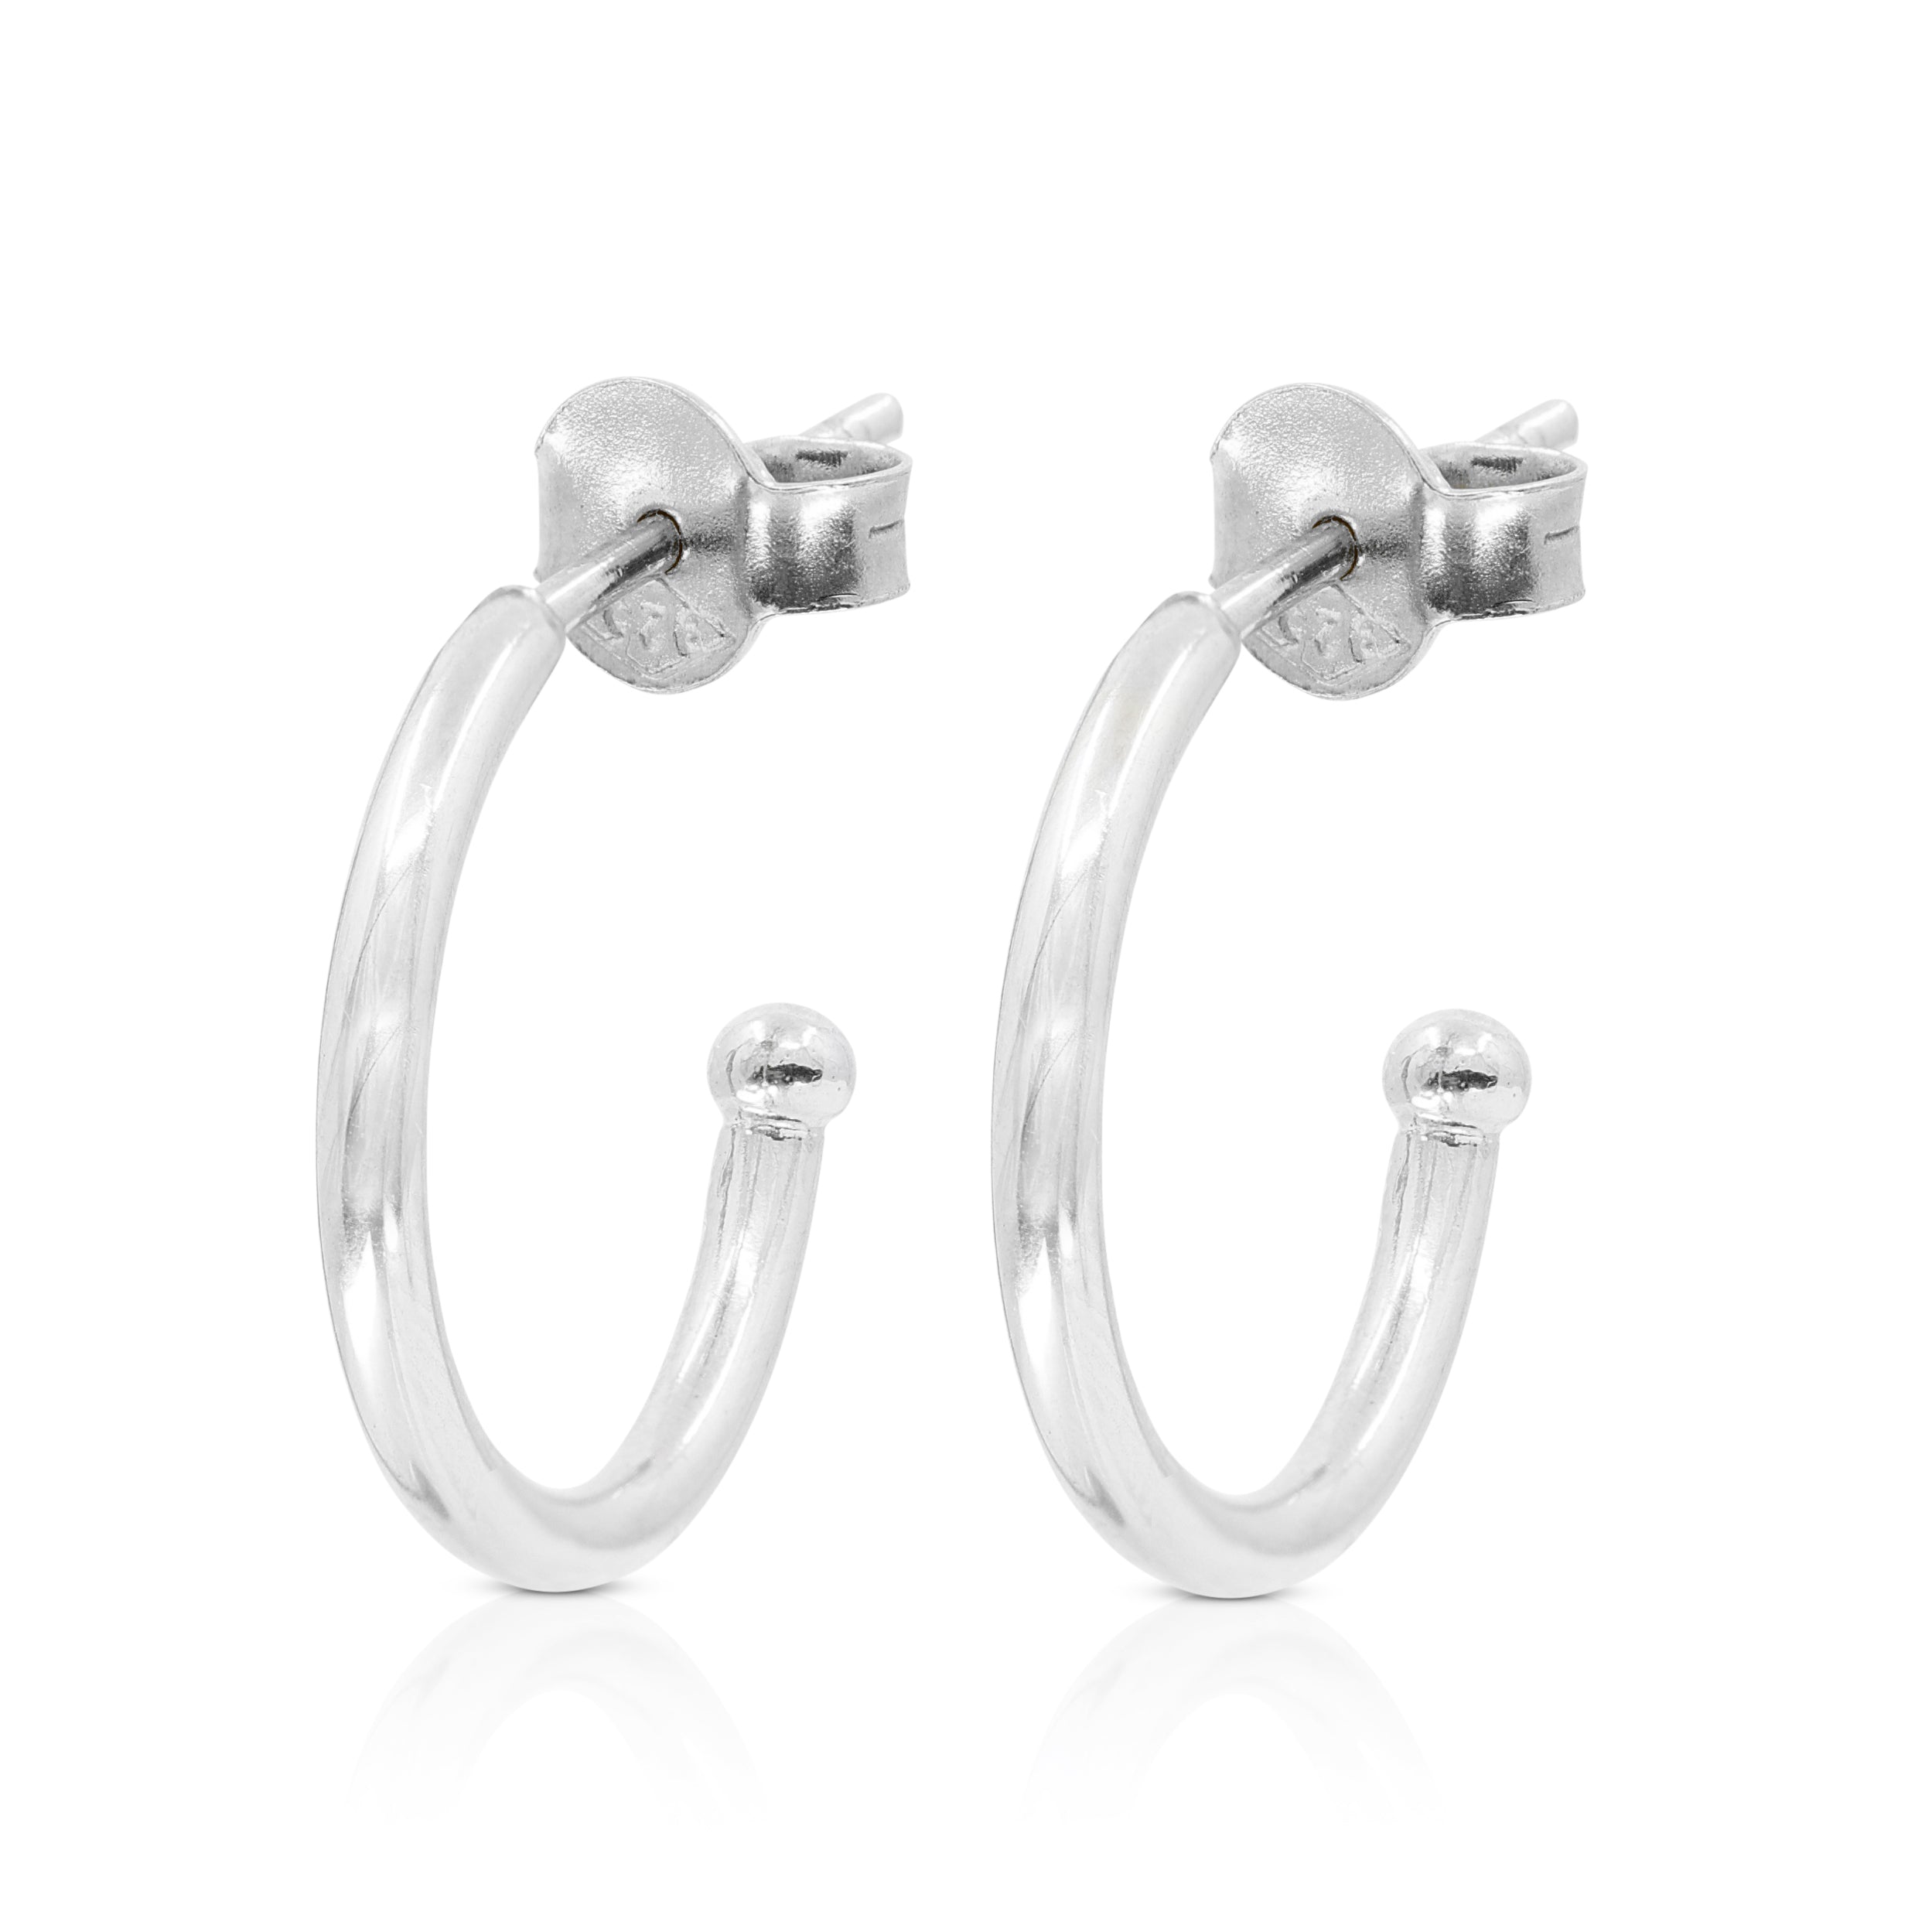 Polished Silver Hoops - Large